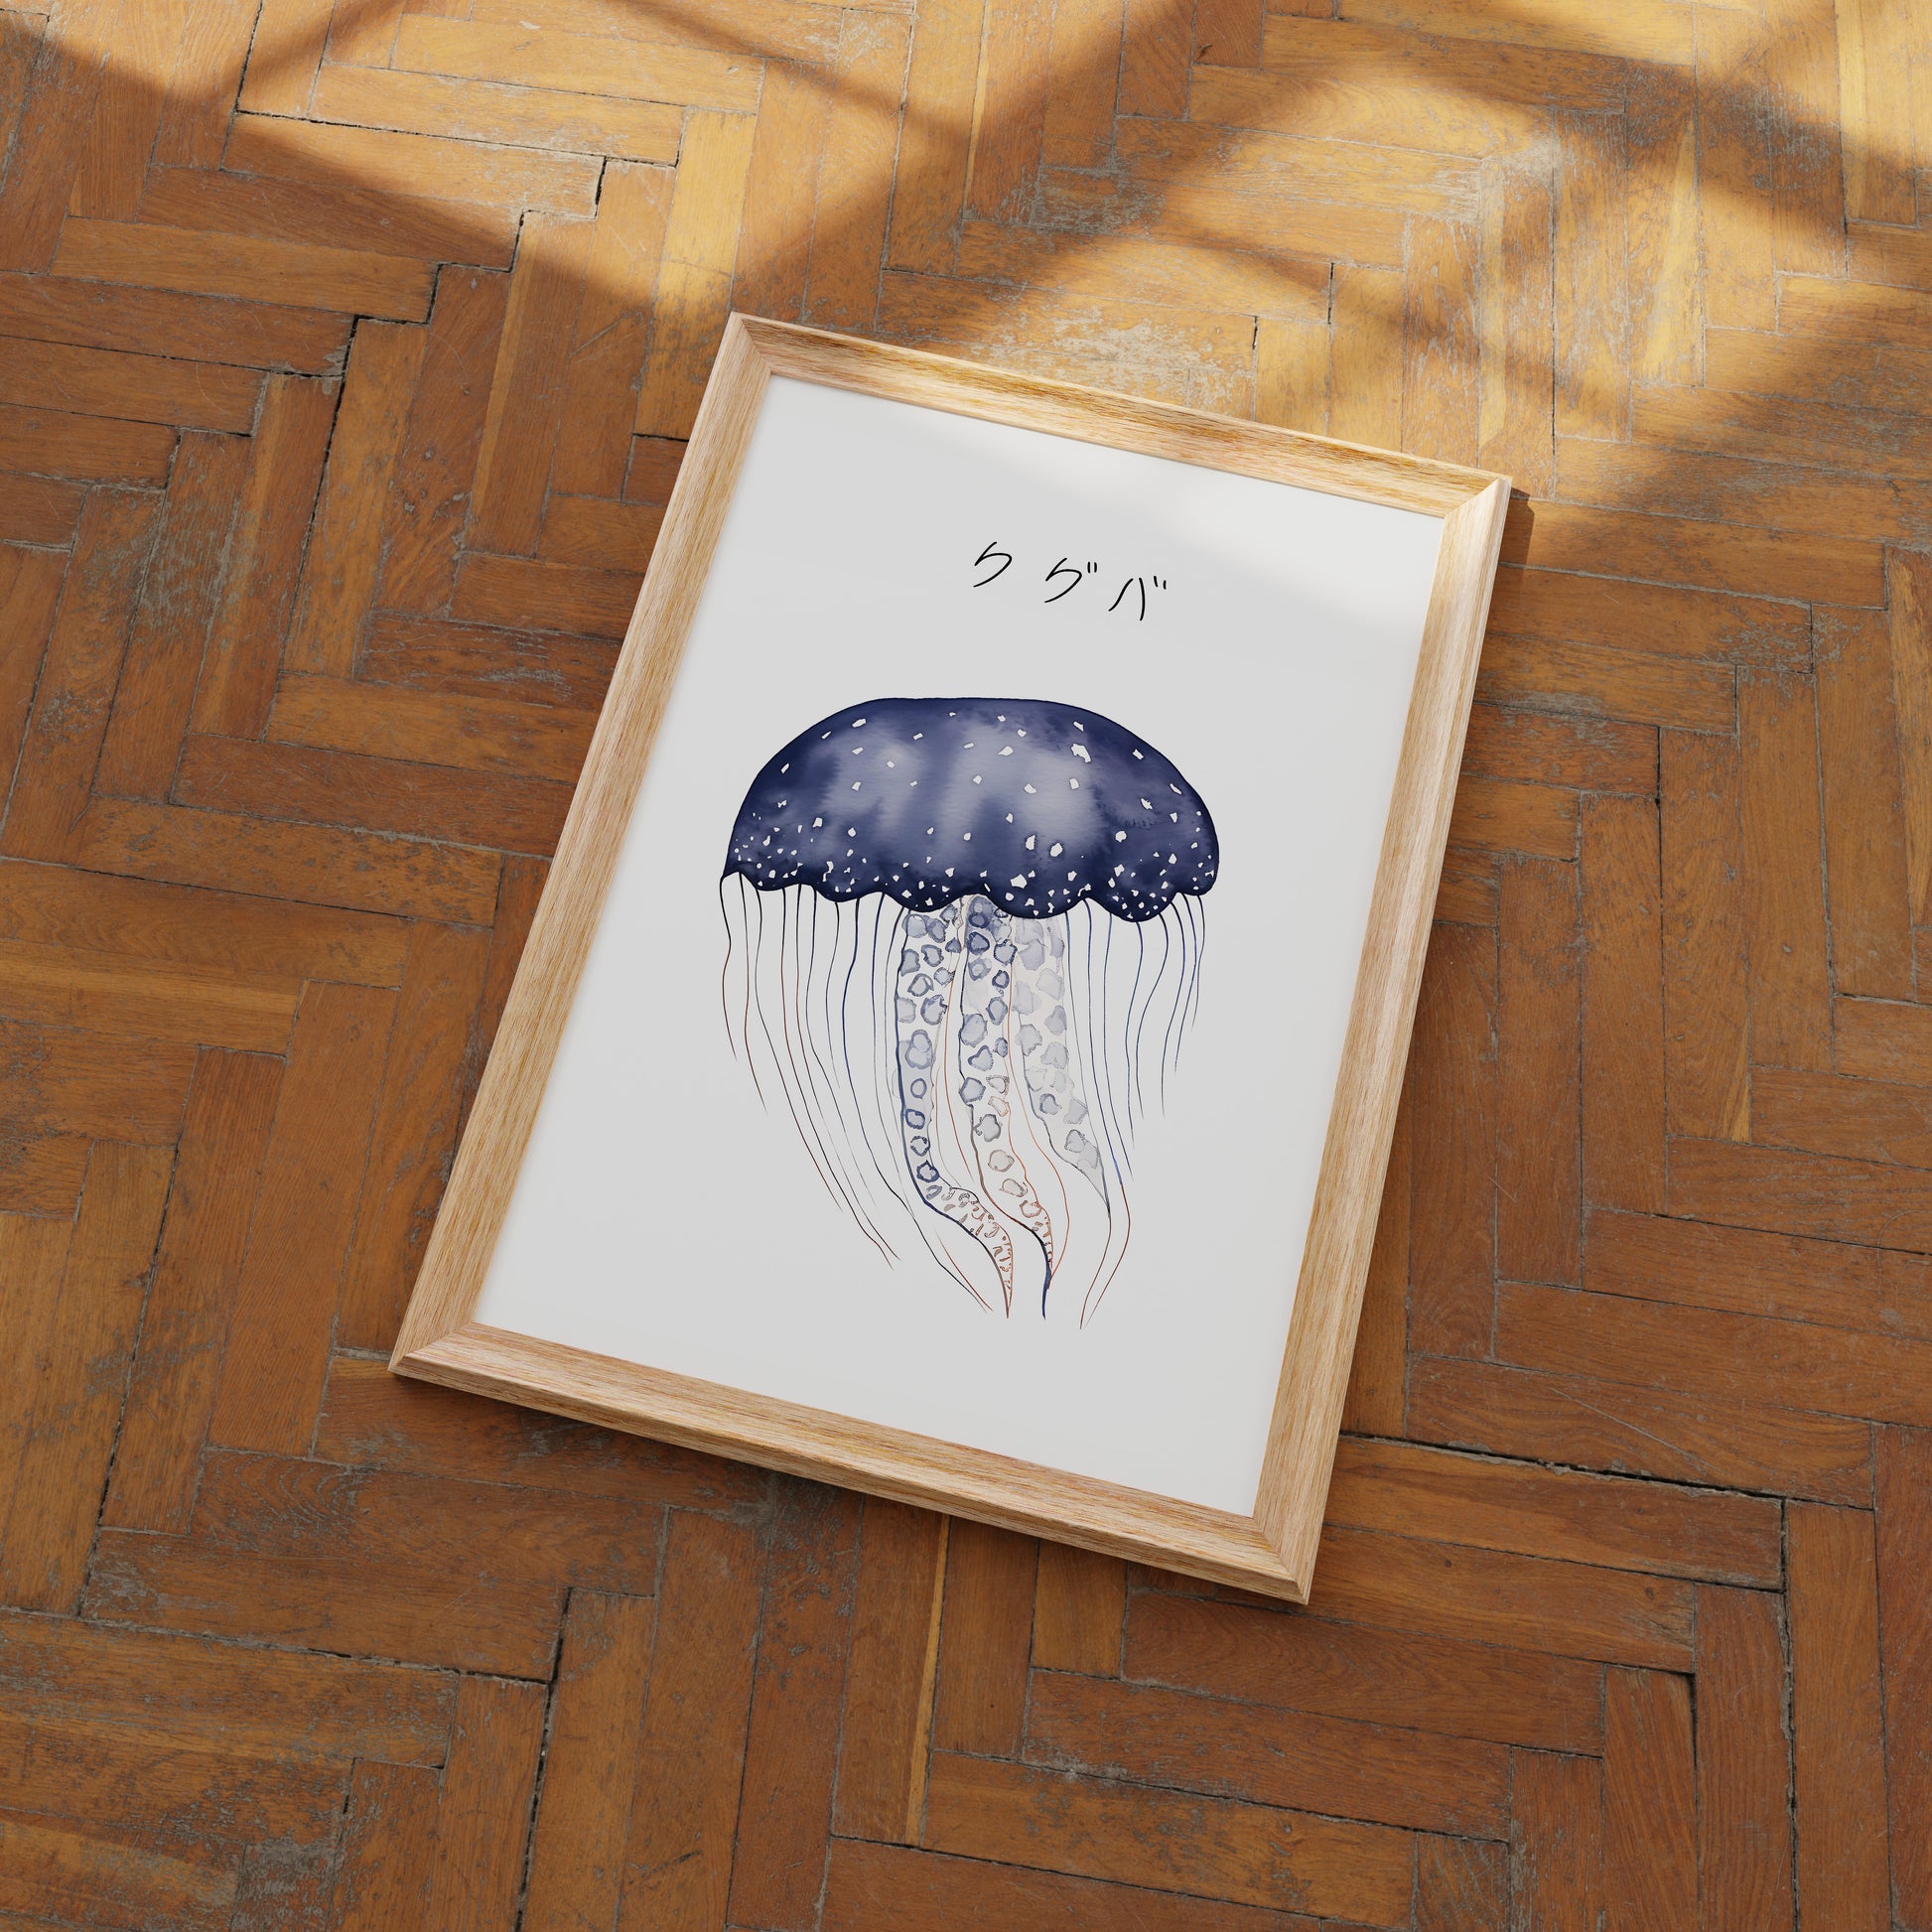 A framed illustration of a jellyfish on a wooden floor.